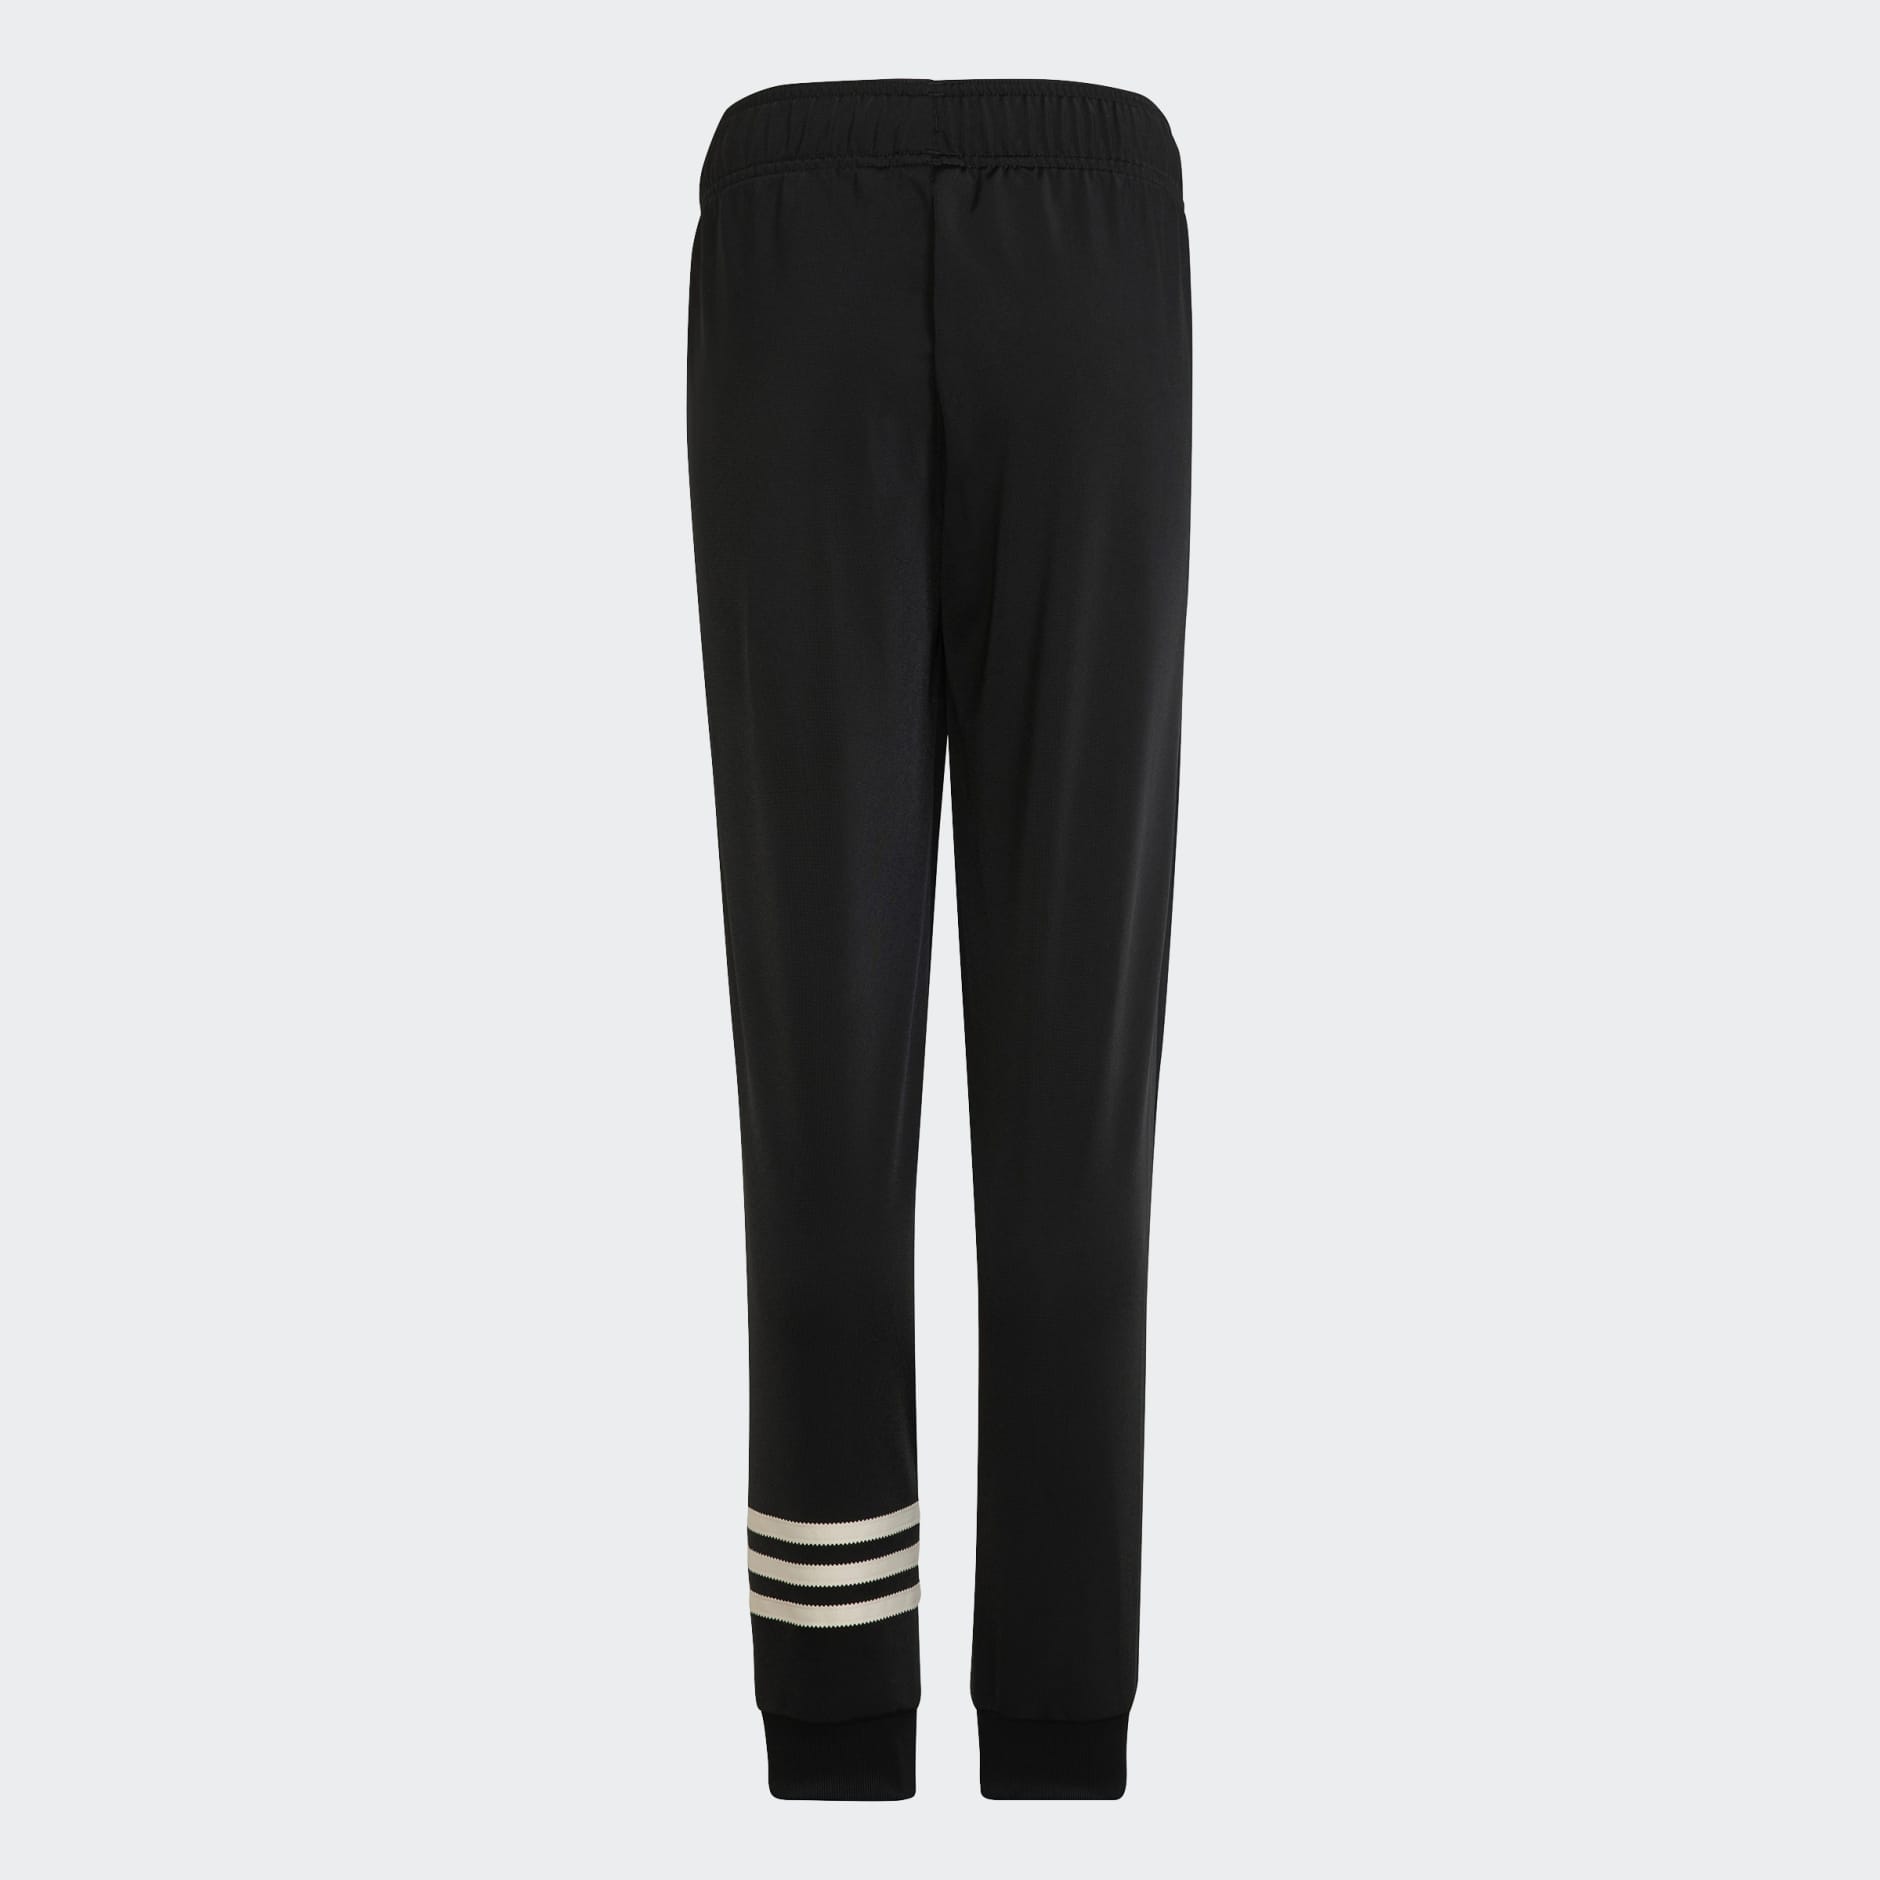 Clothing - Adicolor Track Pants - Black | adidas South Africa